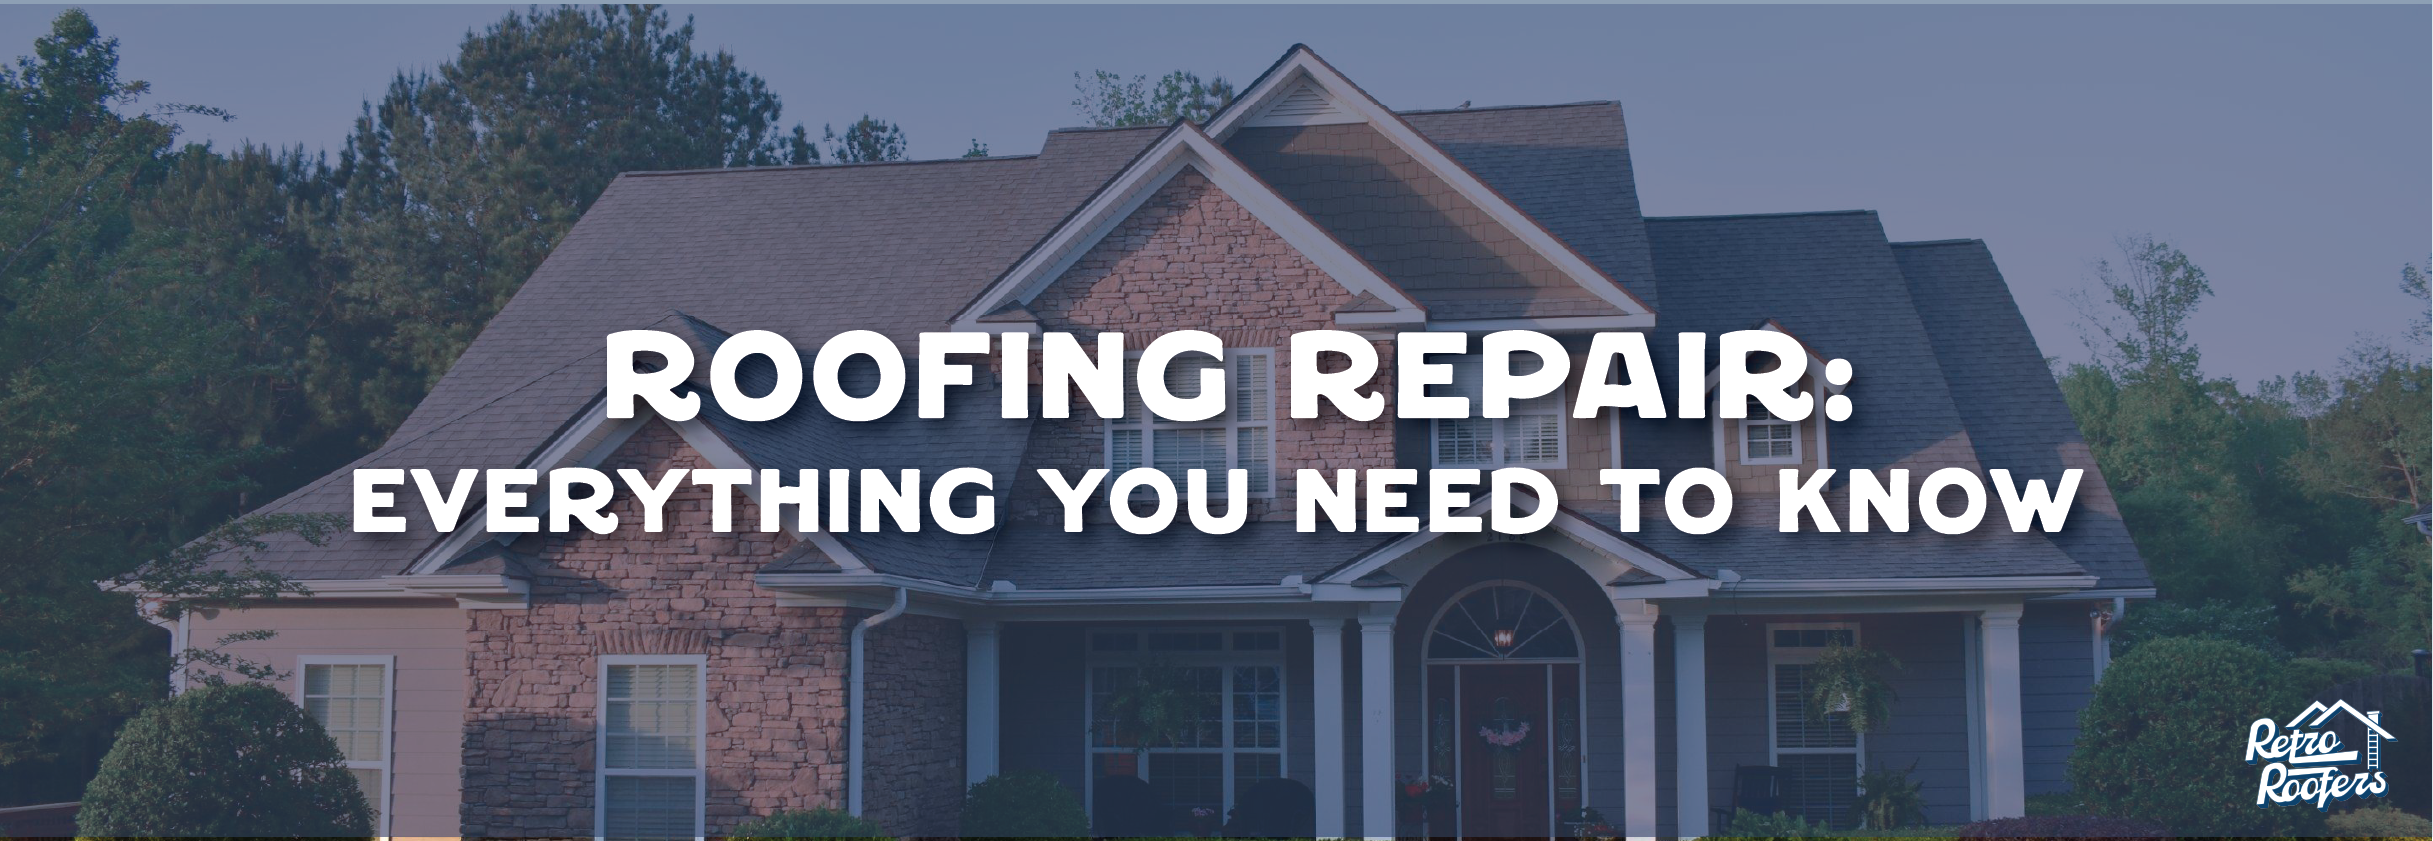 roofing-repair-everything-you-need-to-know